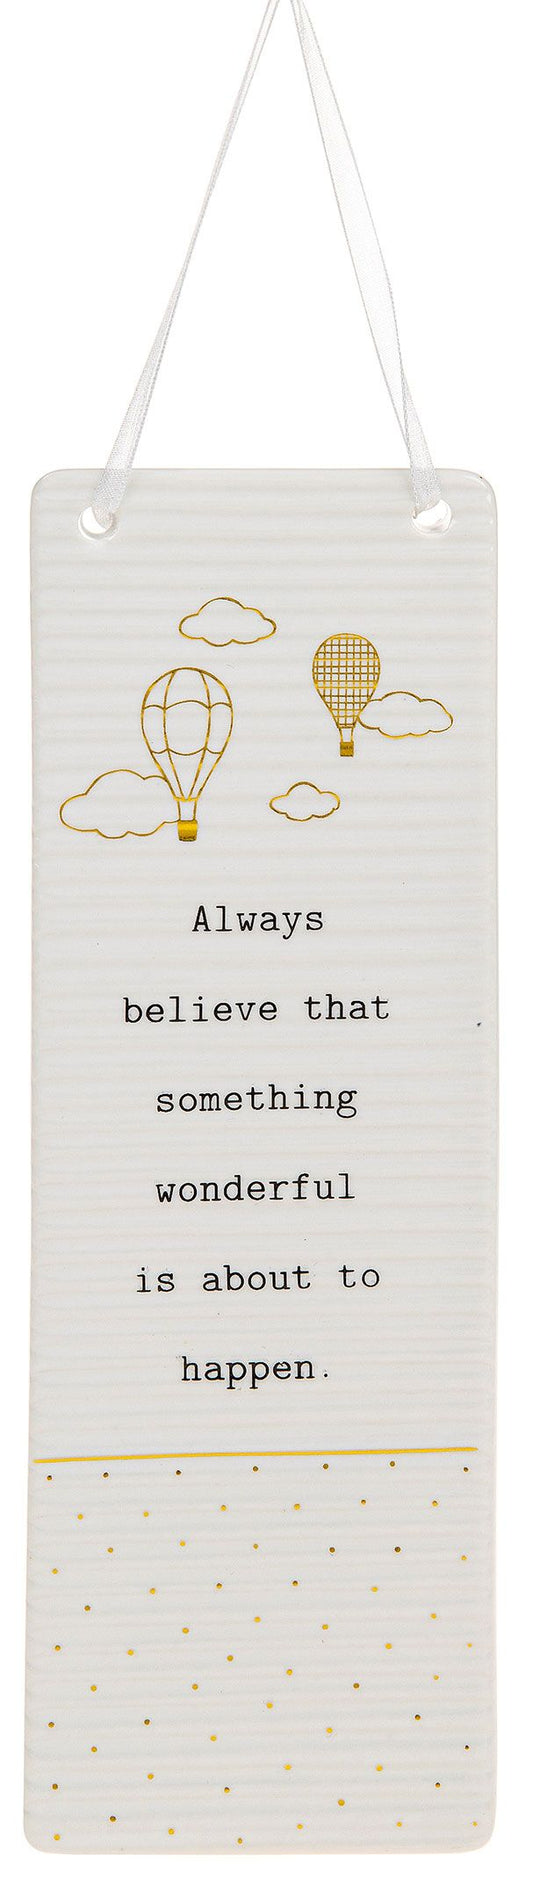 Always believe that something wonderful is about to happen. Rectangle hanging plaque